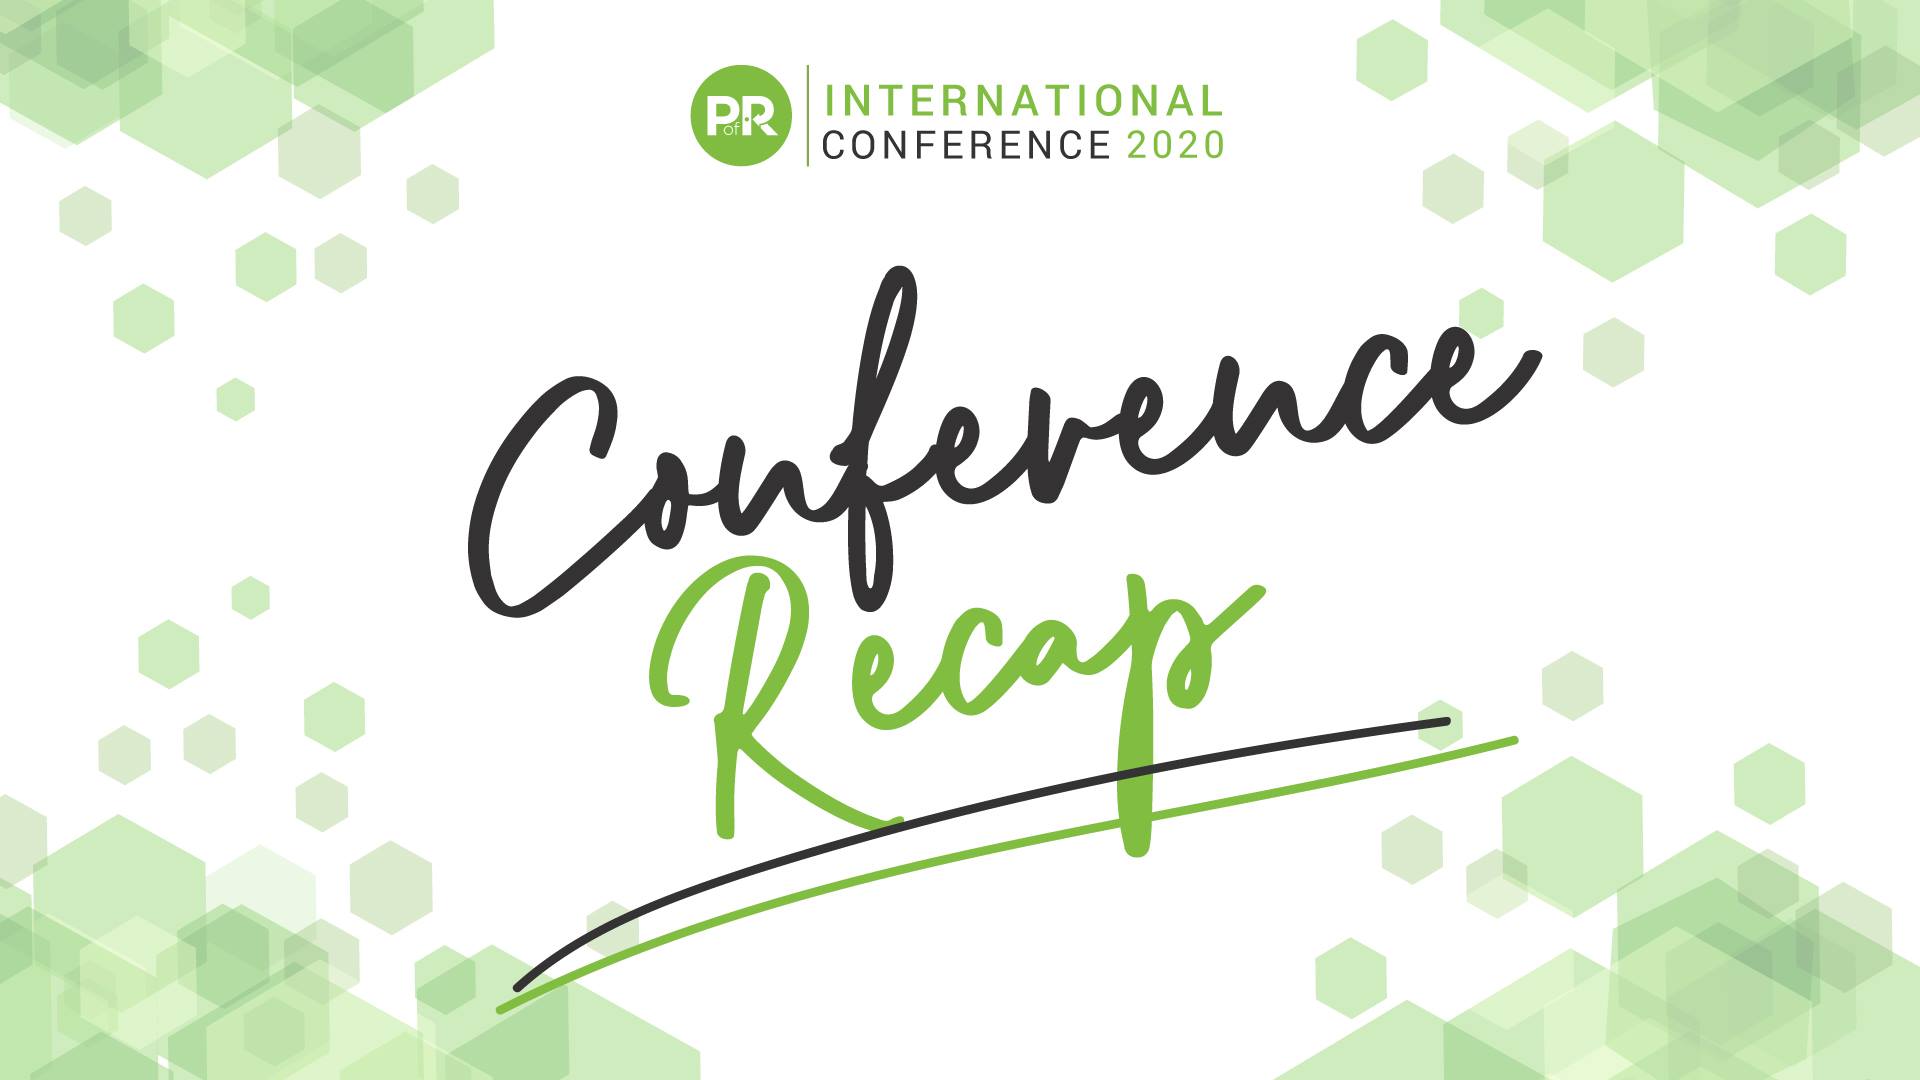 2020 International Conference Recap in handwriting on a white background with green hexagons